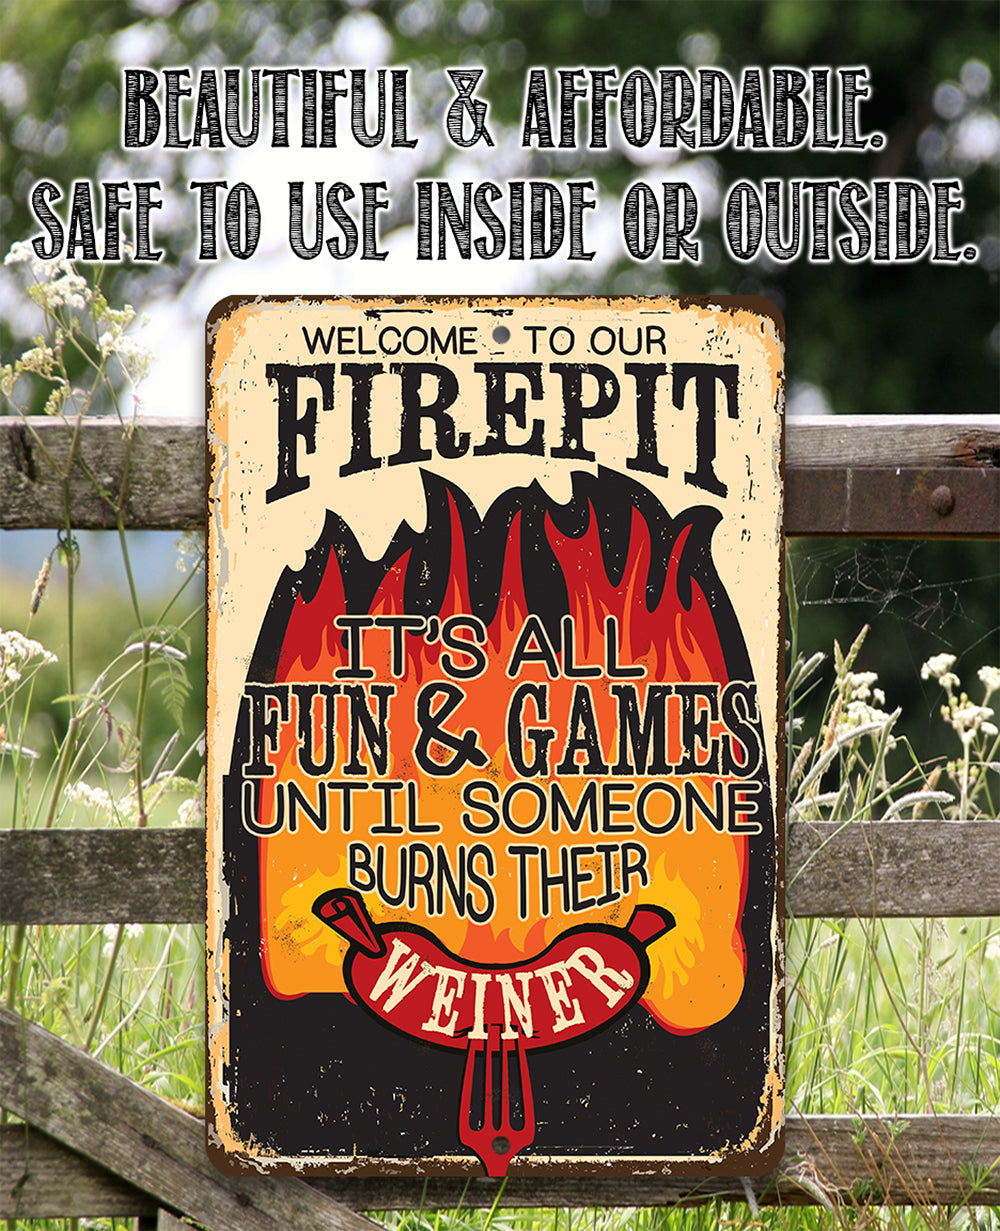 It's All Fun and Games - Metal Sign Metal Sign Lone Star Art 